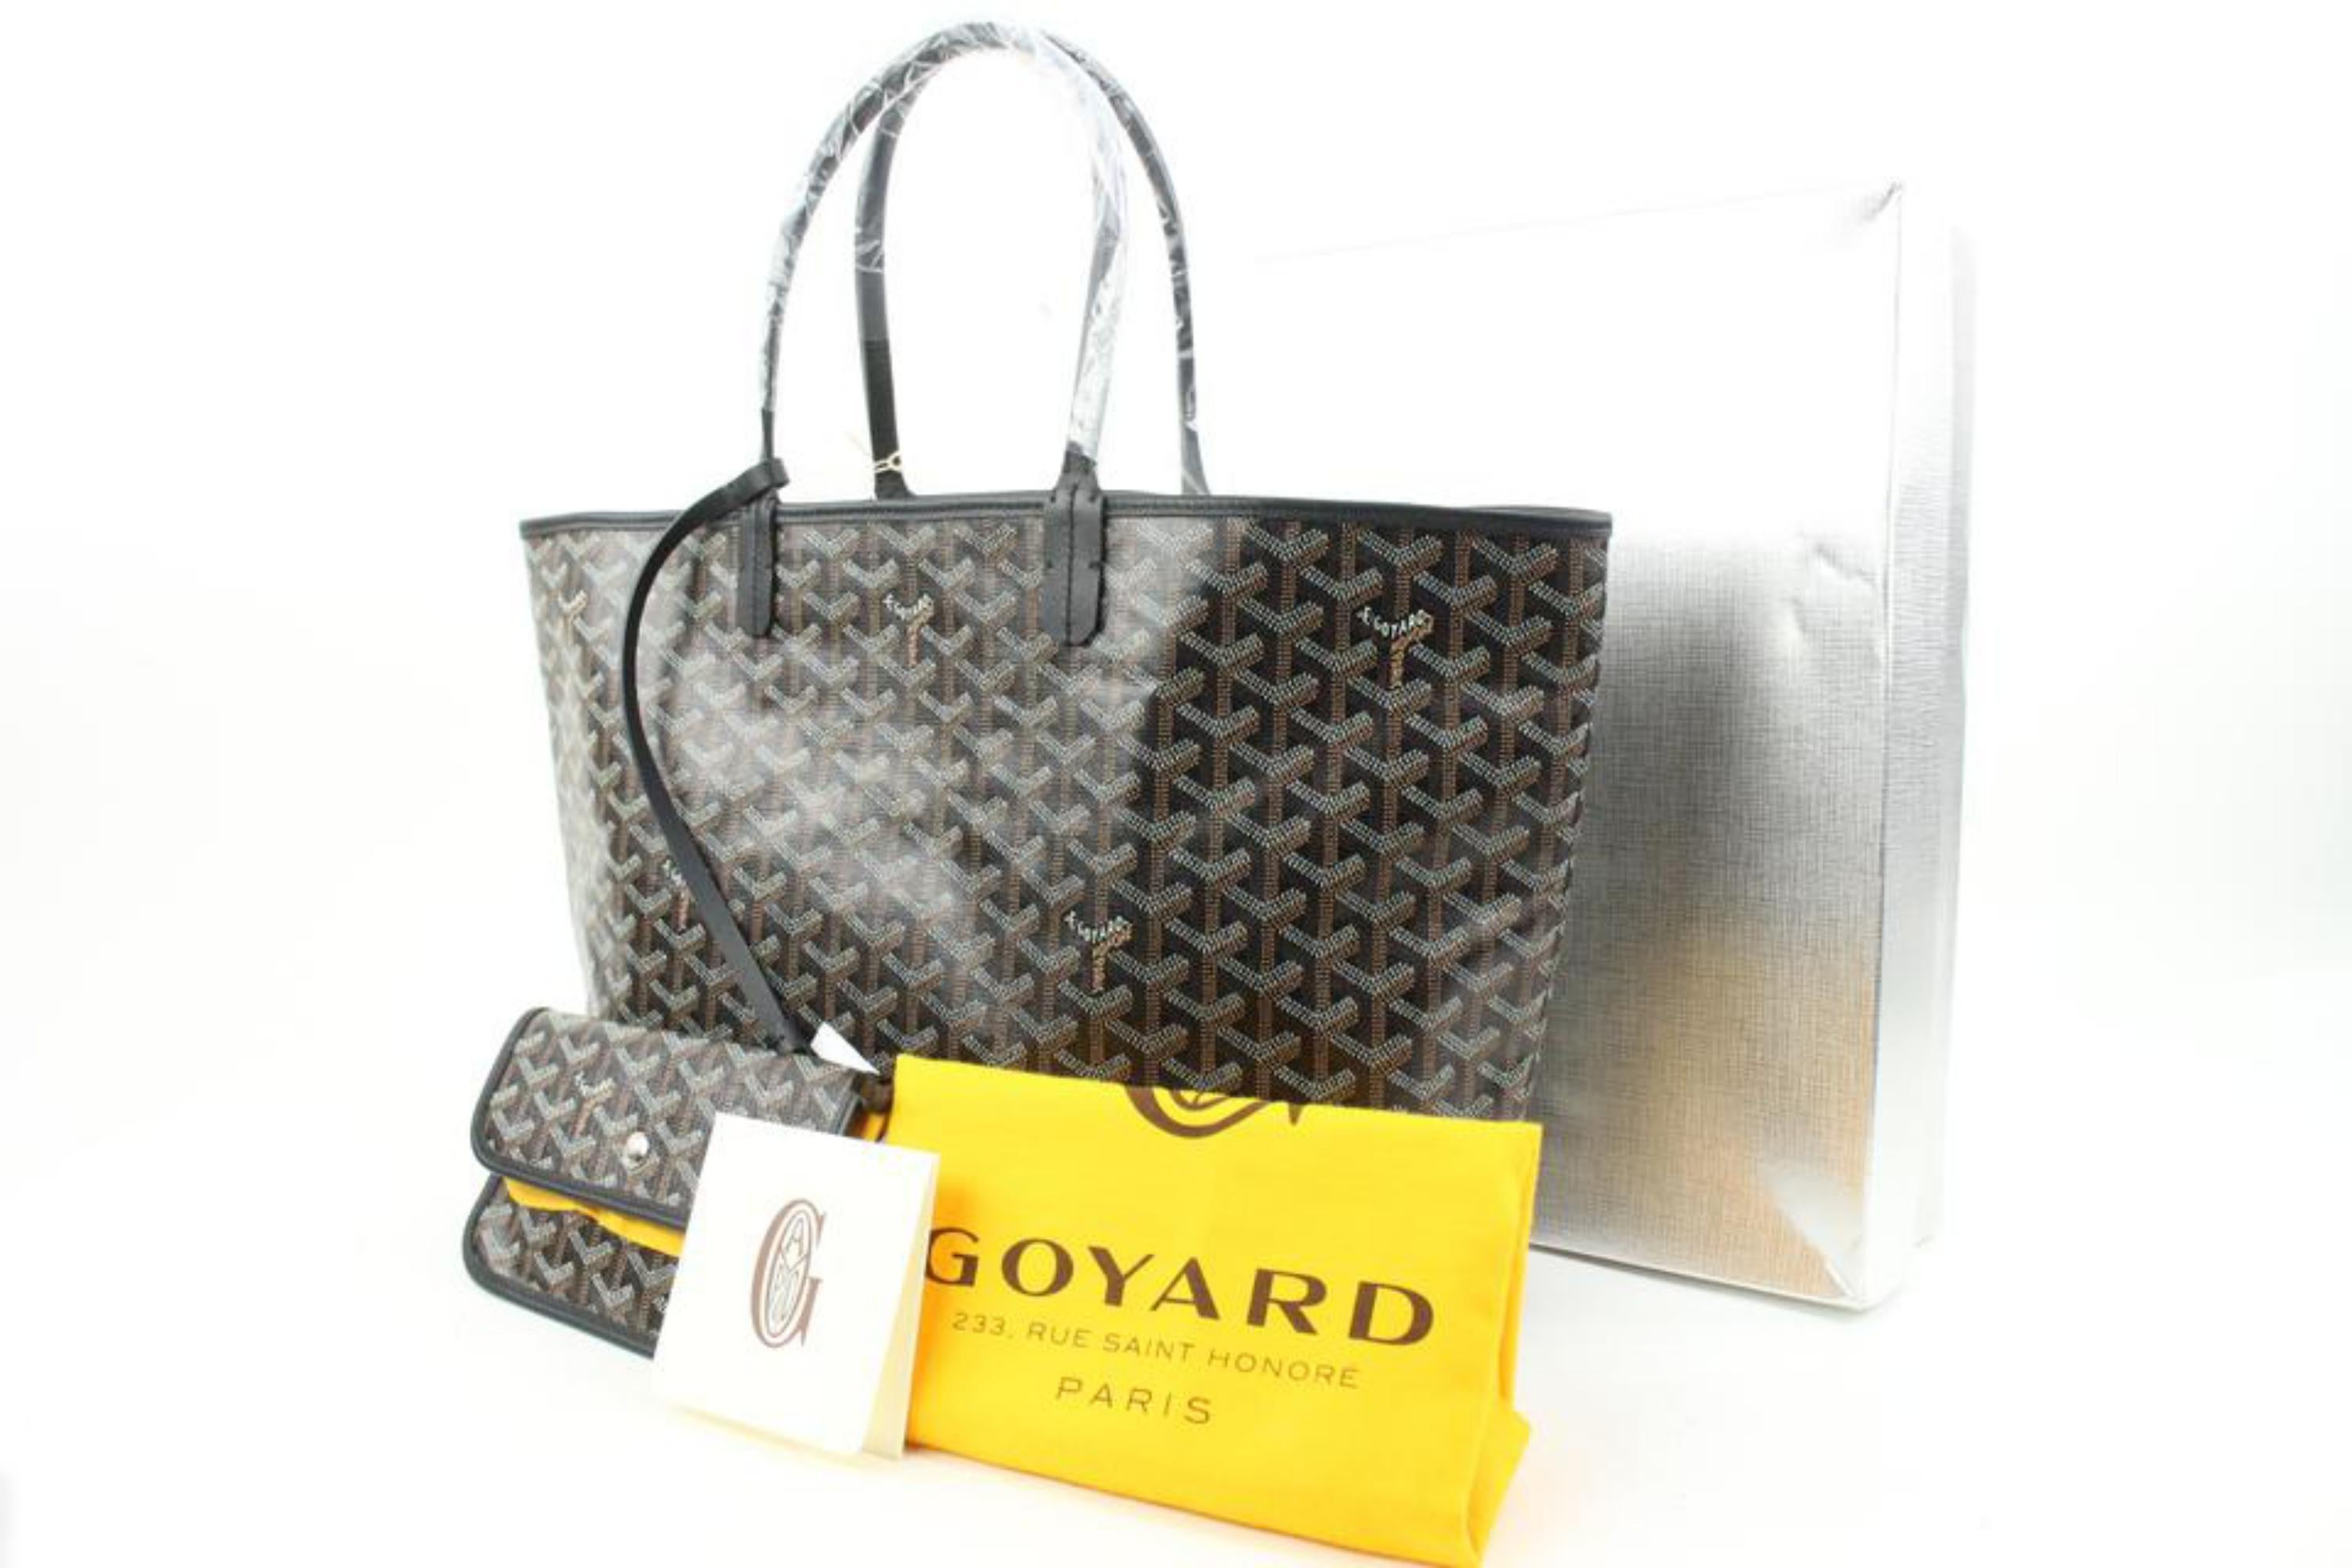 Goyard Black Chevron St Louis PM Tote Bag with Pouch 25gy131s
Date Code/Serial Number: ADM 120201
Made In: France
Measurements: Length:  18.5